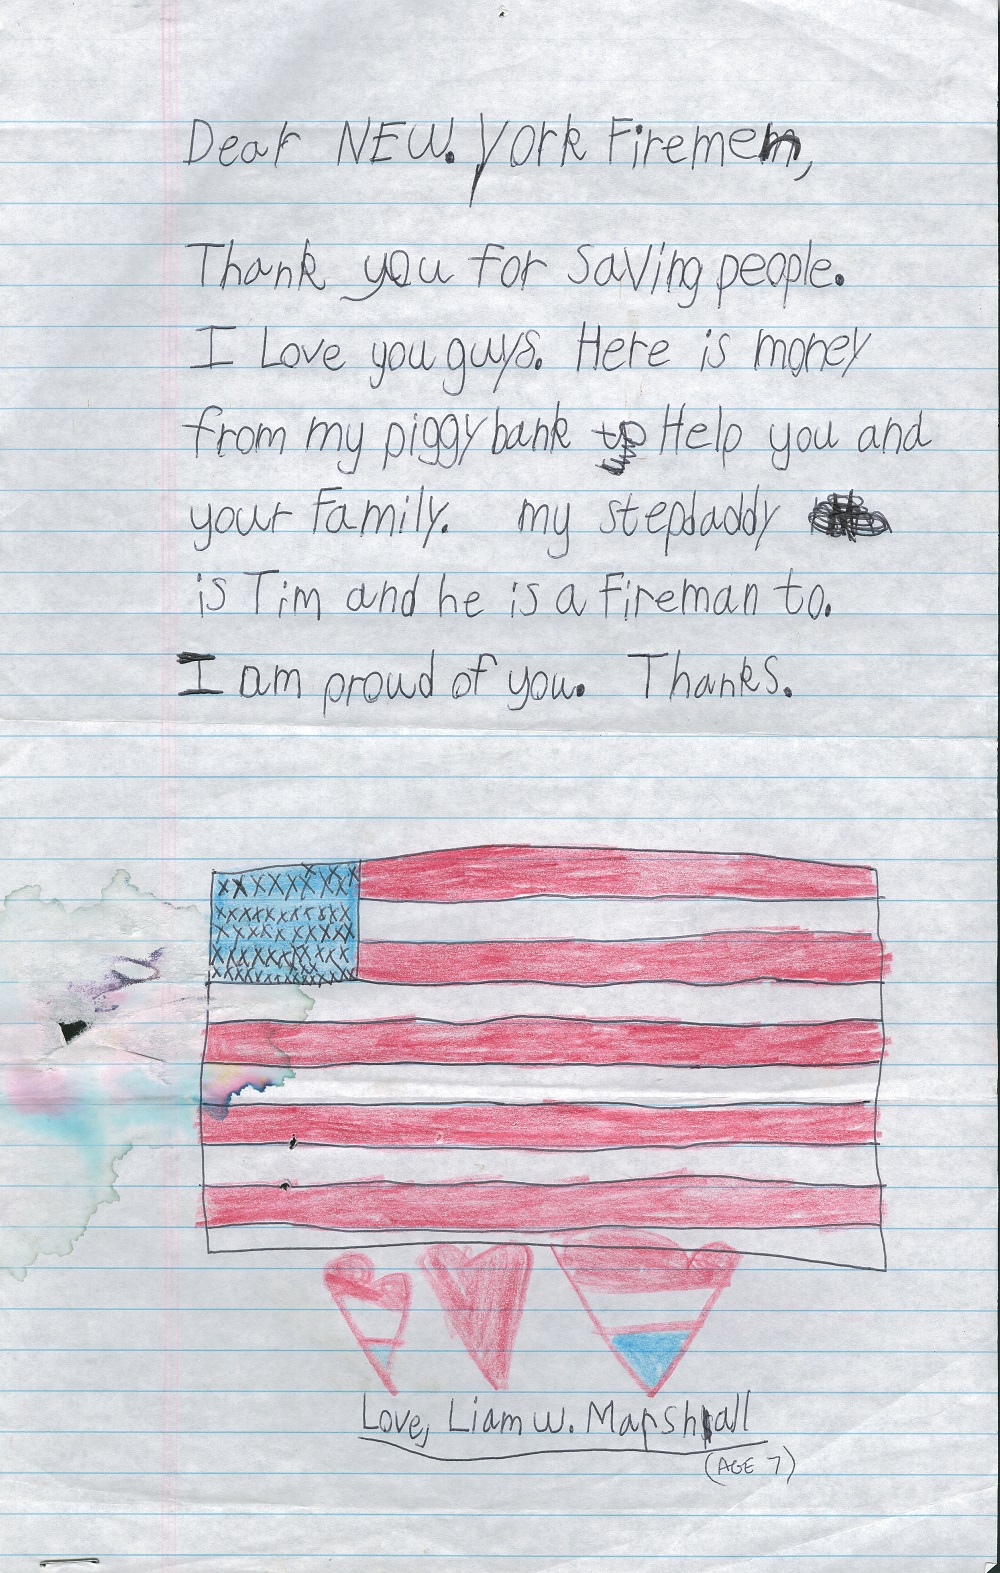 A child’s letter written to New York firefighters includes a message and a drawing of the American flag. Under the flag are three hearts colored red, white, and blue. The message above the flag reads: “Thank you for saving people. I love you guys. Here is money from my piggy bank to help you and your family. My stepdaddy is Tim and he is a fireman too. I am proud of you. Thanks.”